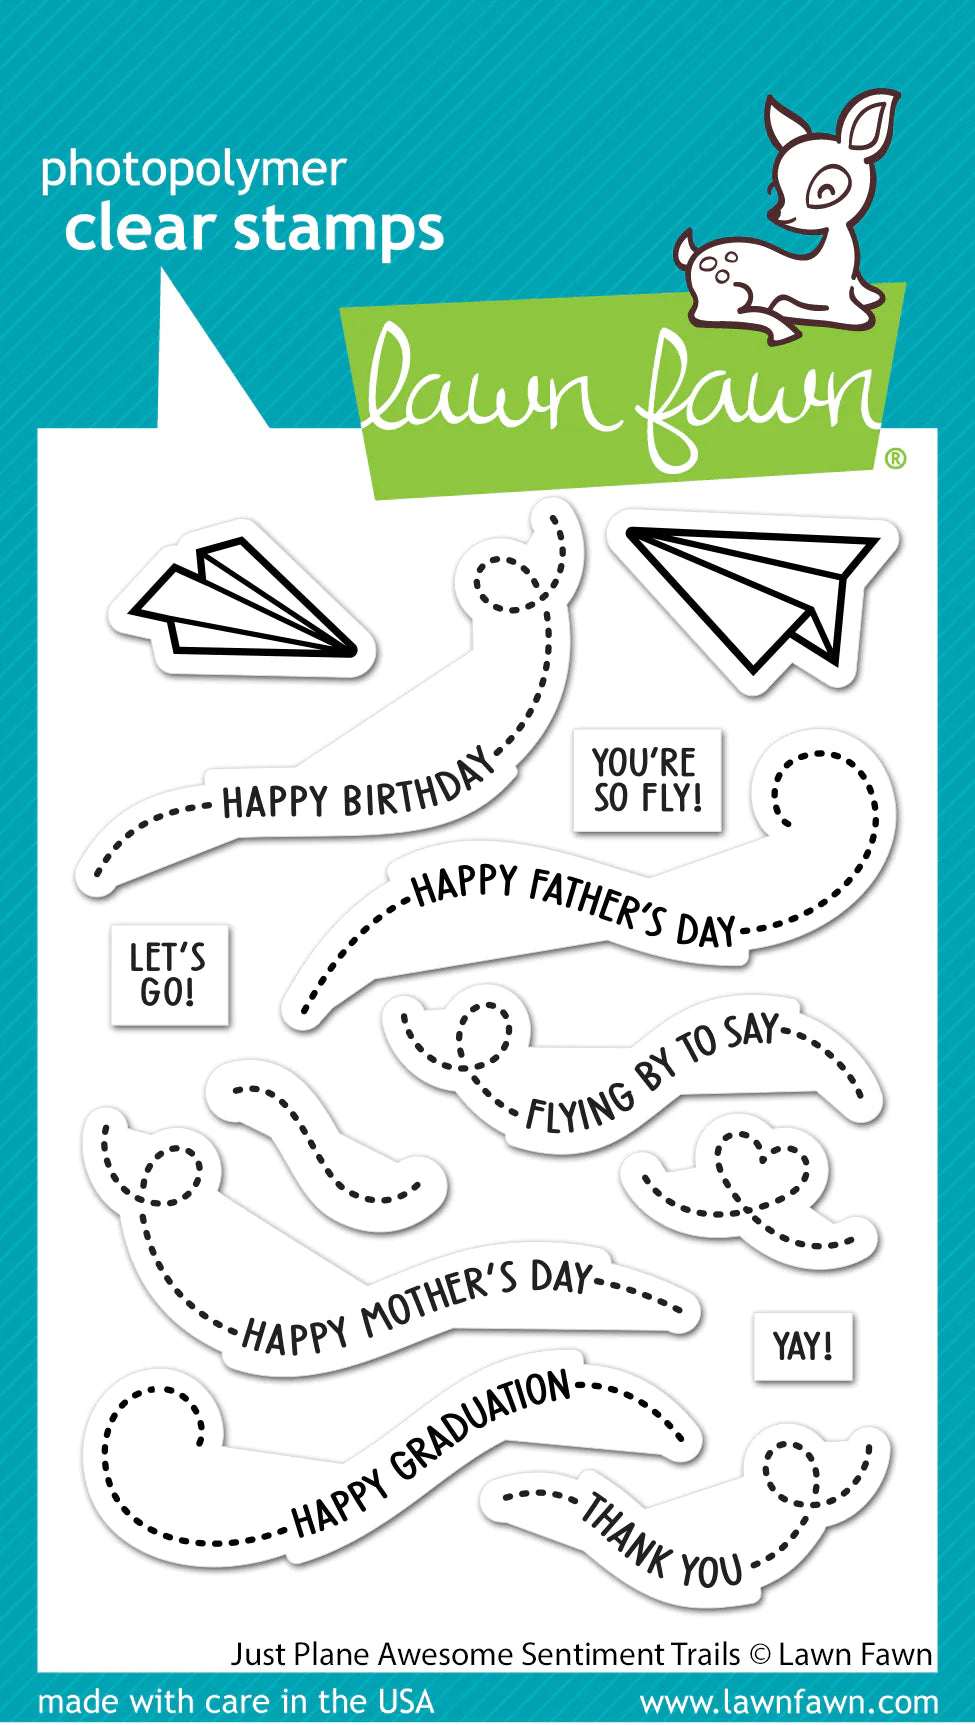 Lawn Fawn - just plane awesome sentiment trails - clear stamp set